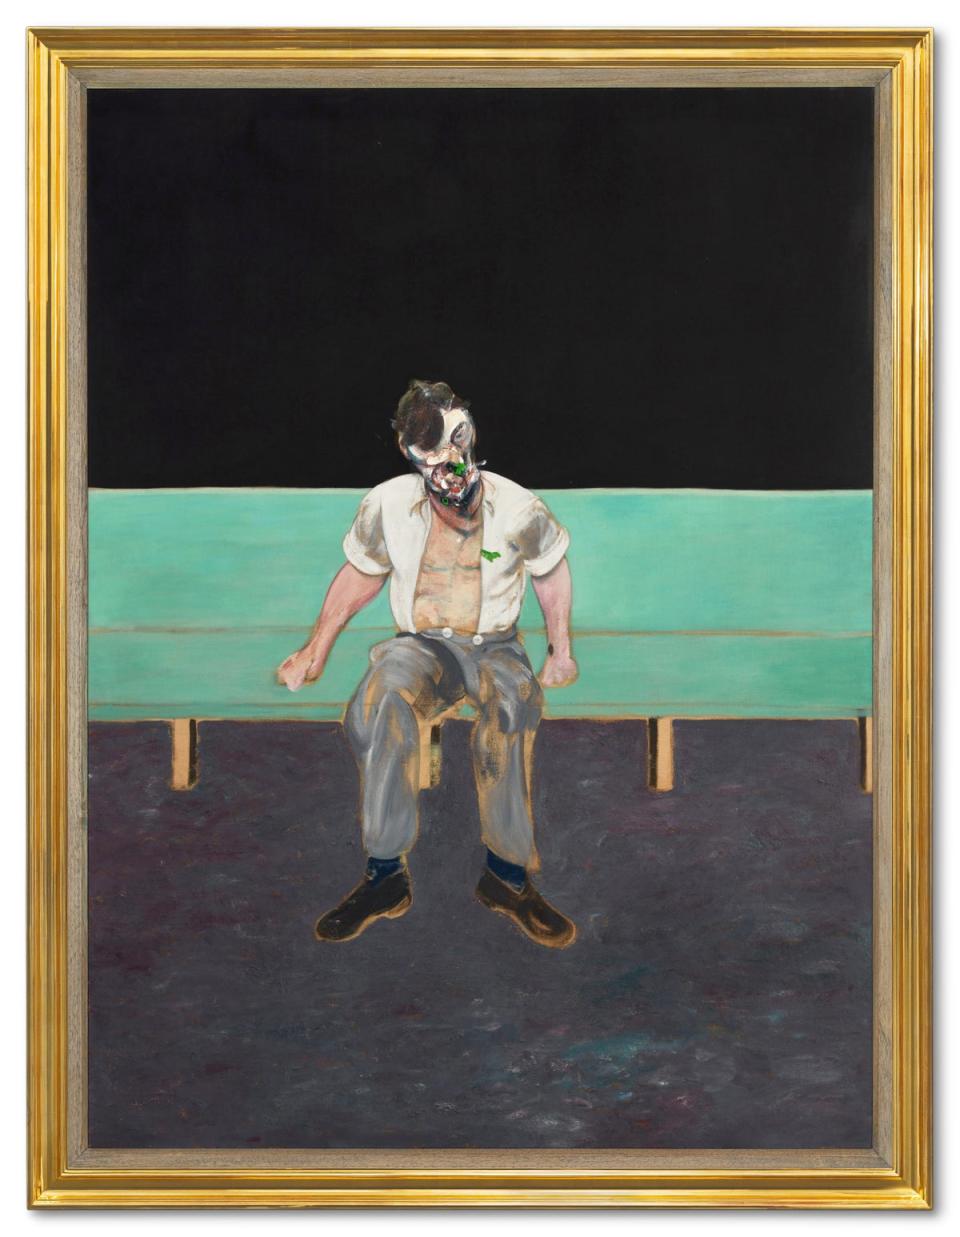 Study for Portrait of Lucian Freud by Francis Bacon (Sothebys)